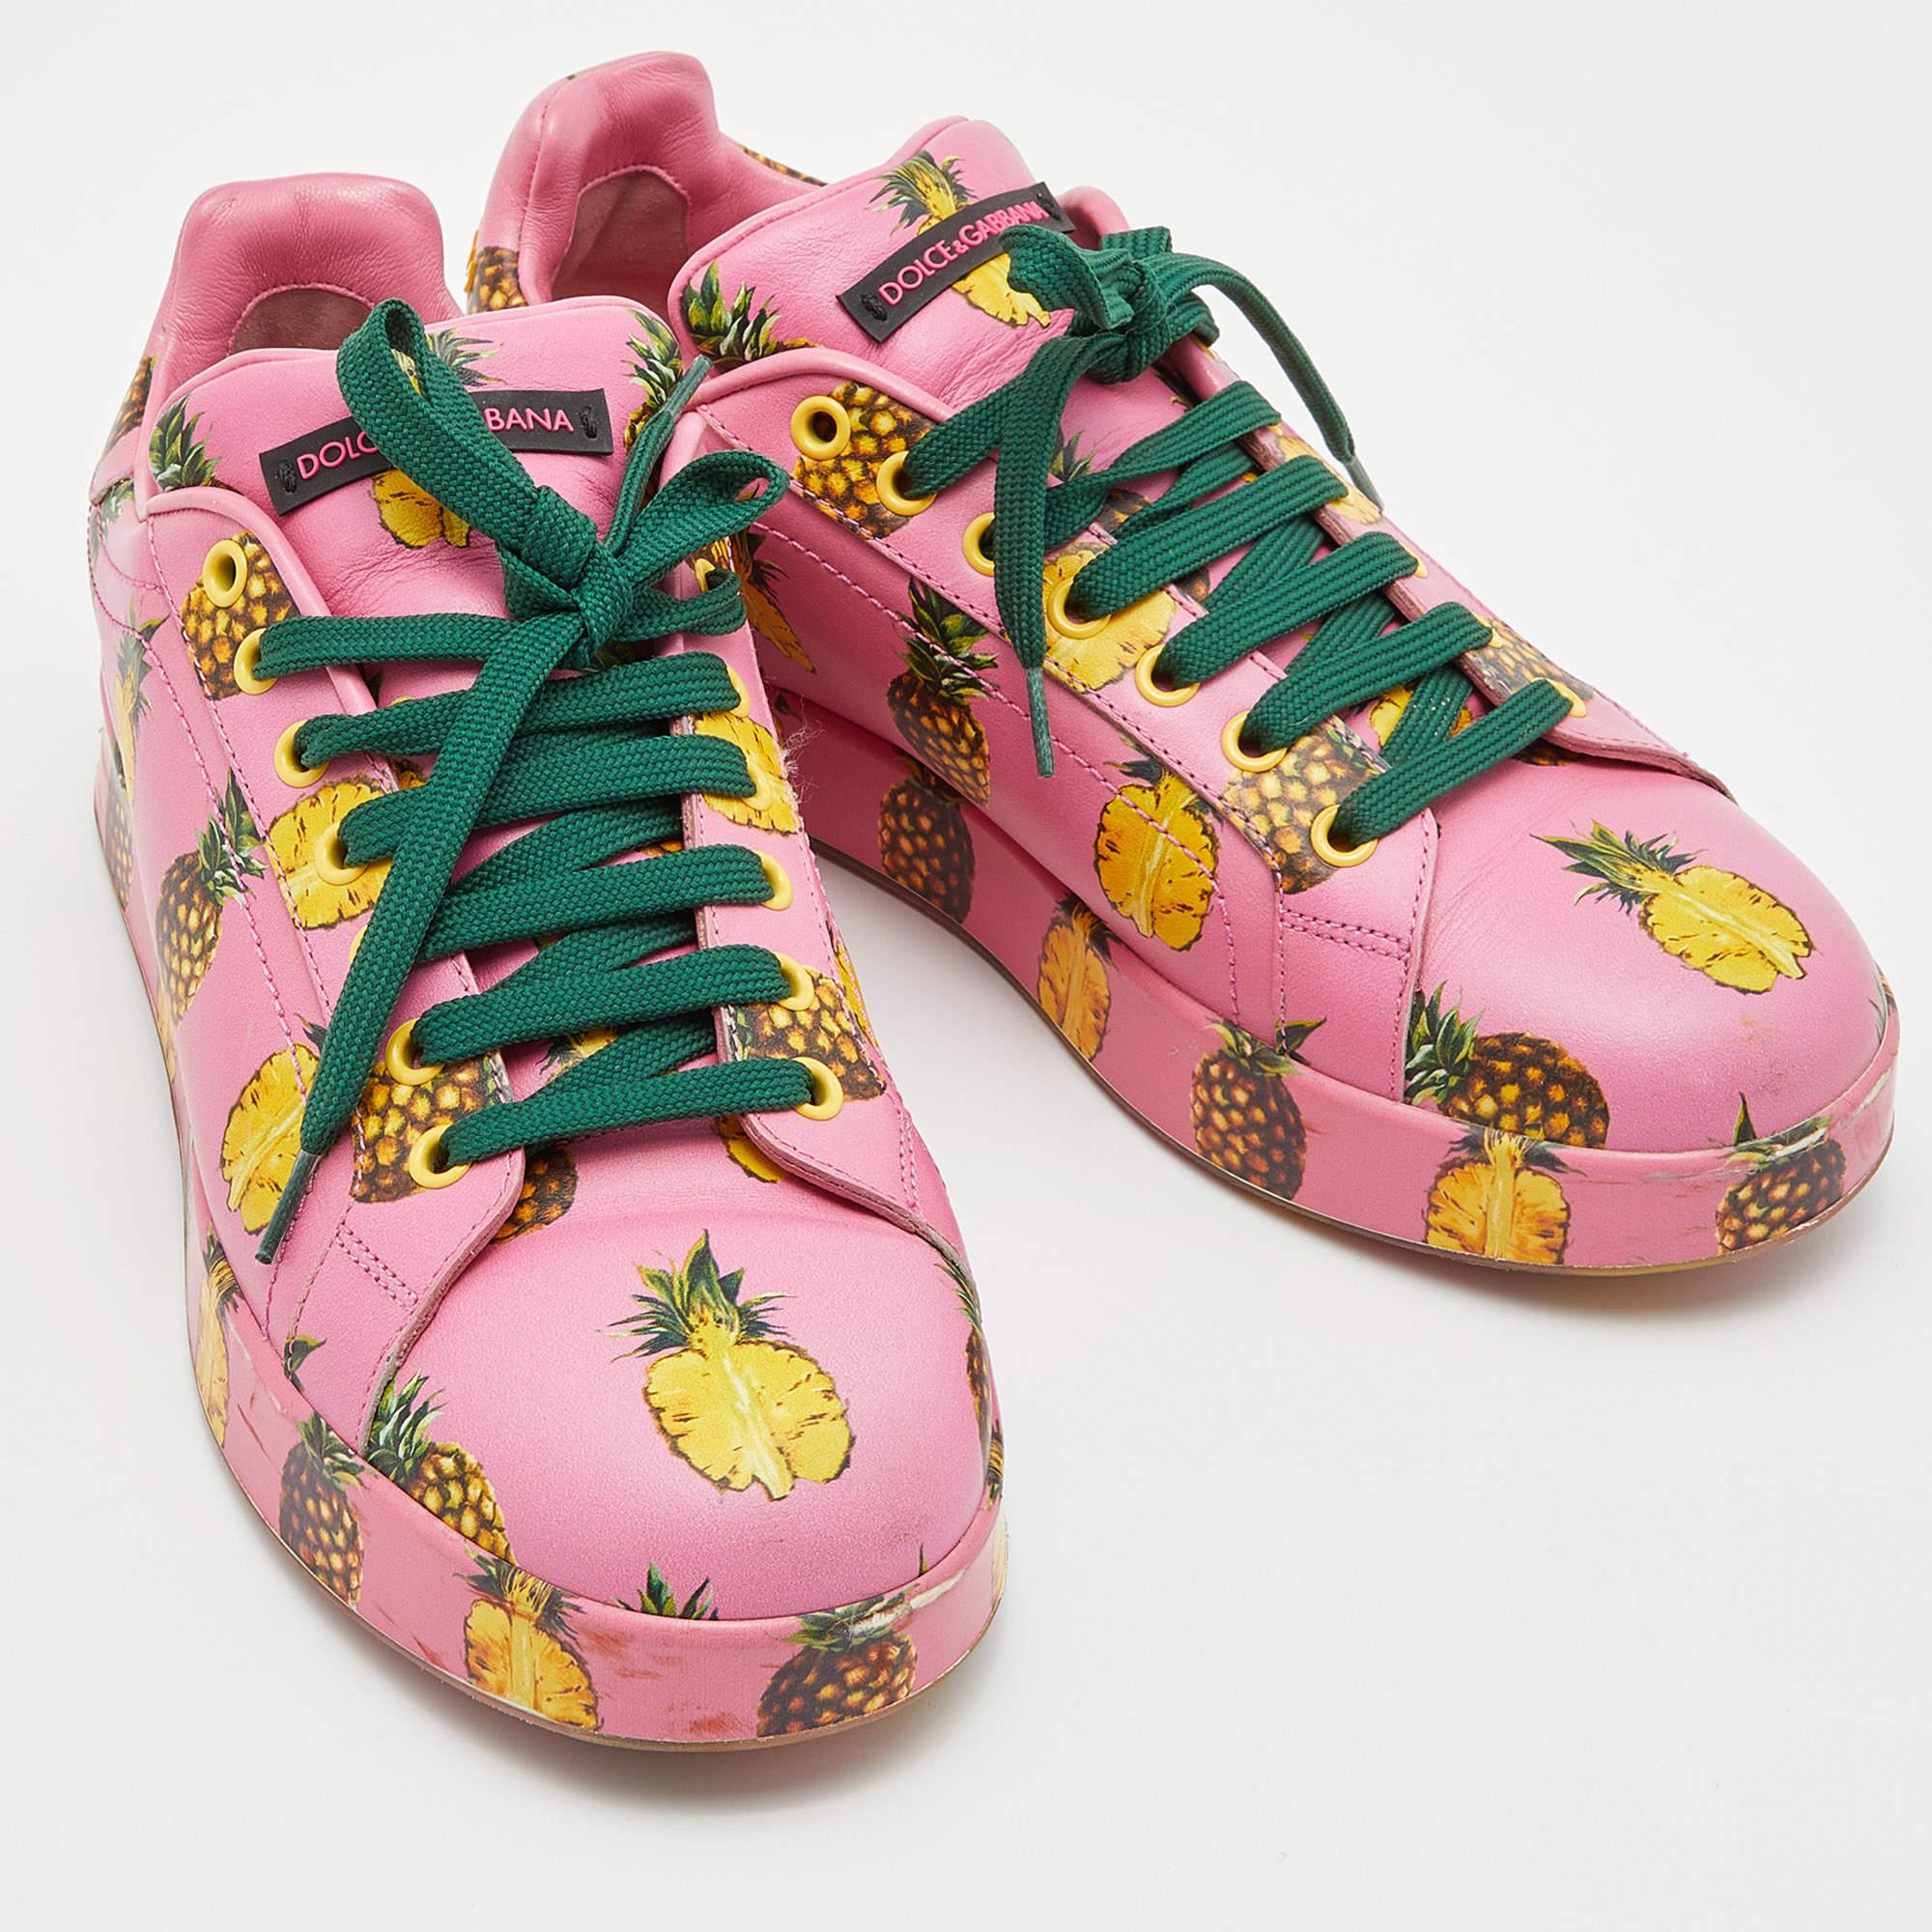 Beige Dolce & Gabbana Pink Pineapple Print Leather Low Top Sneakers Size 40